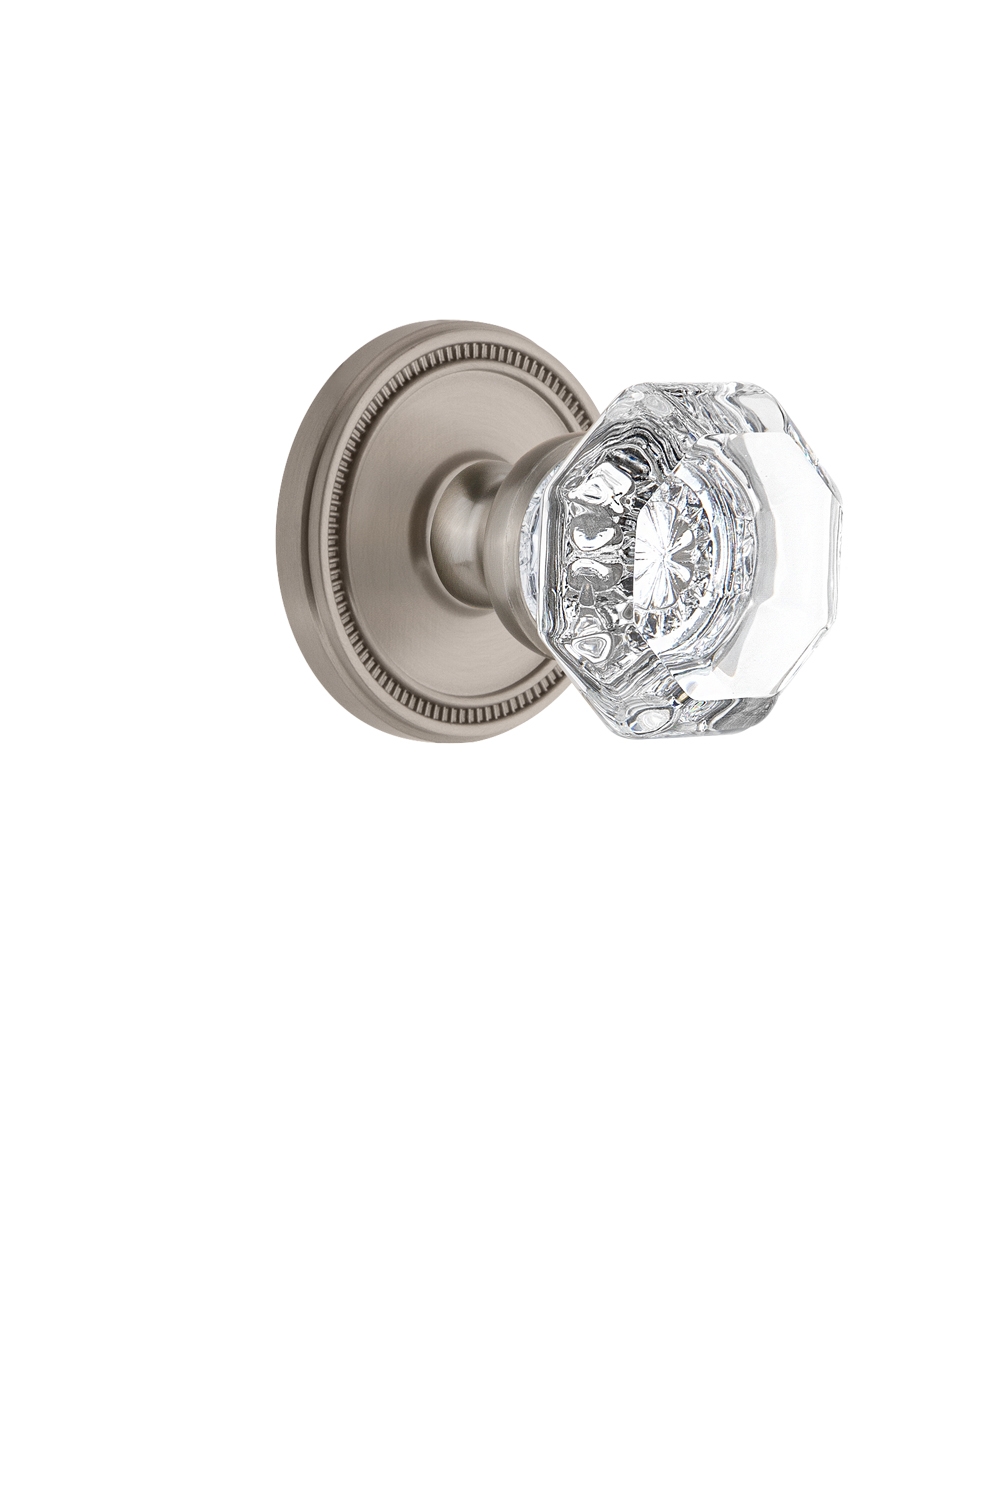 Grandeur 809457 Soleil Rosette Dummy with Chambord Crystal Knob in Timeless Bronze 